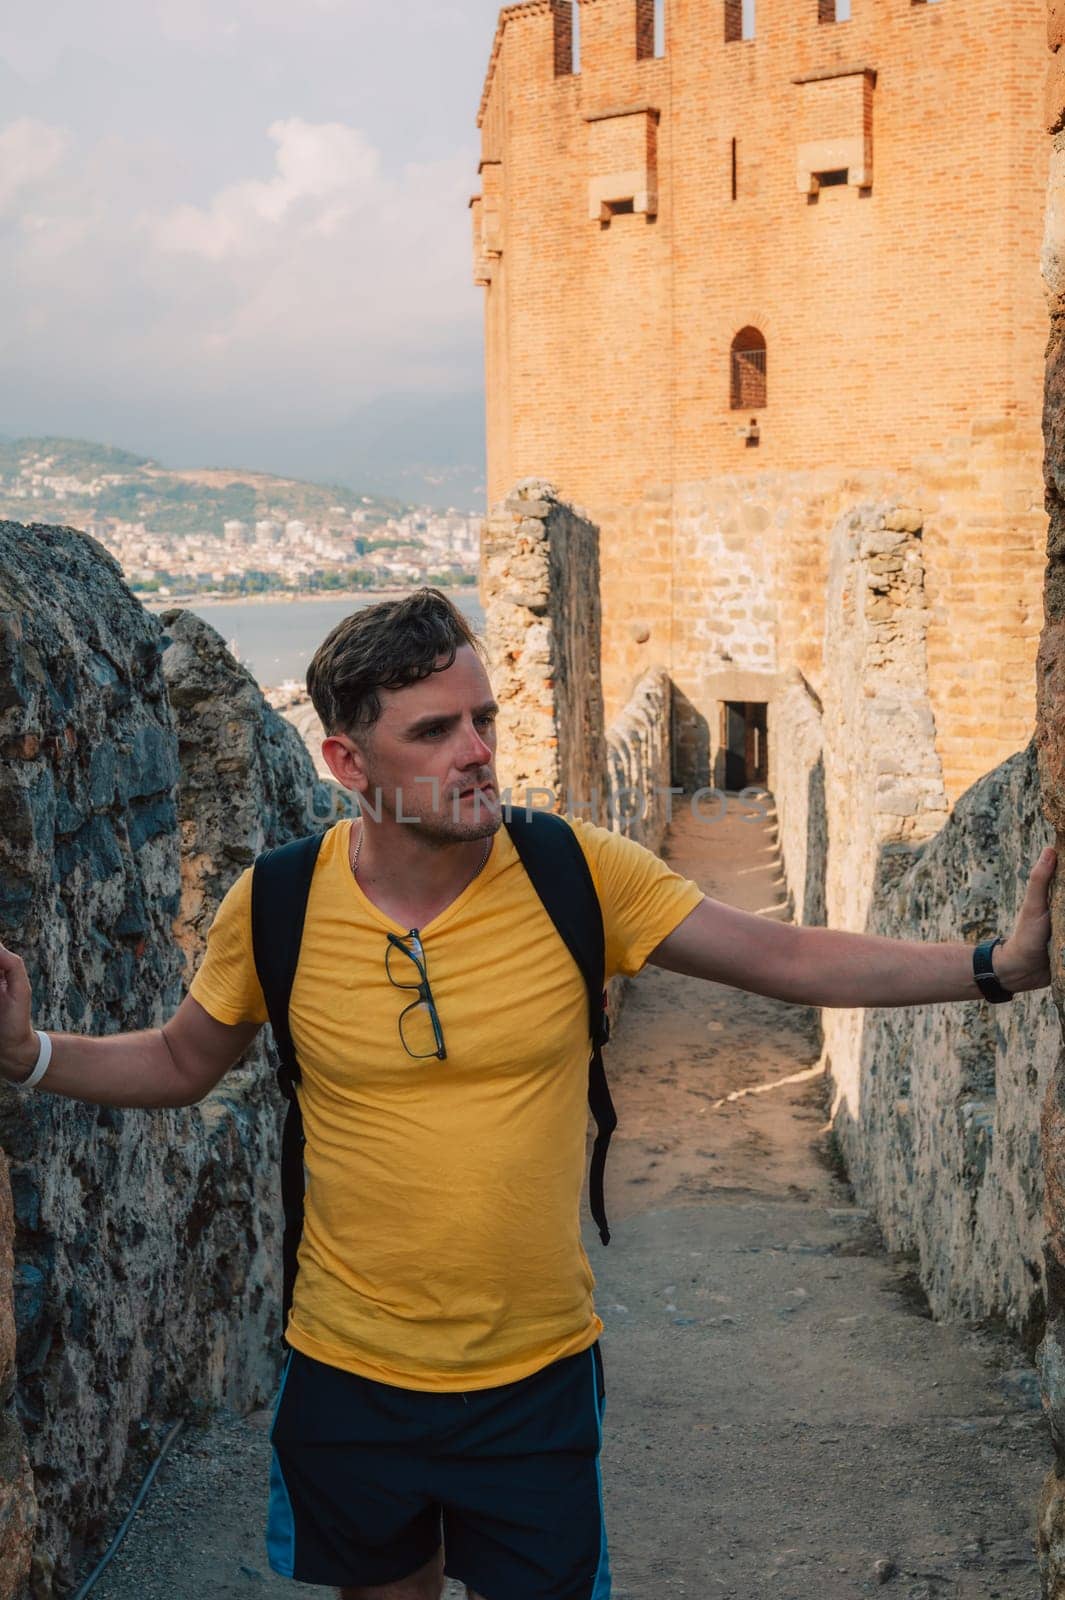 Man at fortress ruins of the historical Red Tower - Kizil Kule, in Alanya Castle, the famous touristic place.